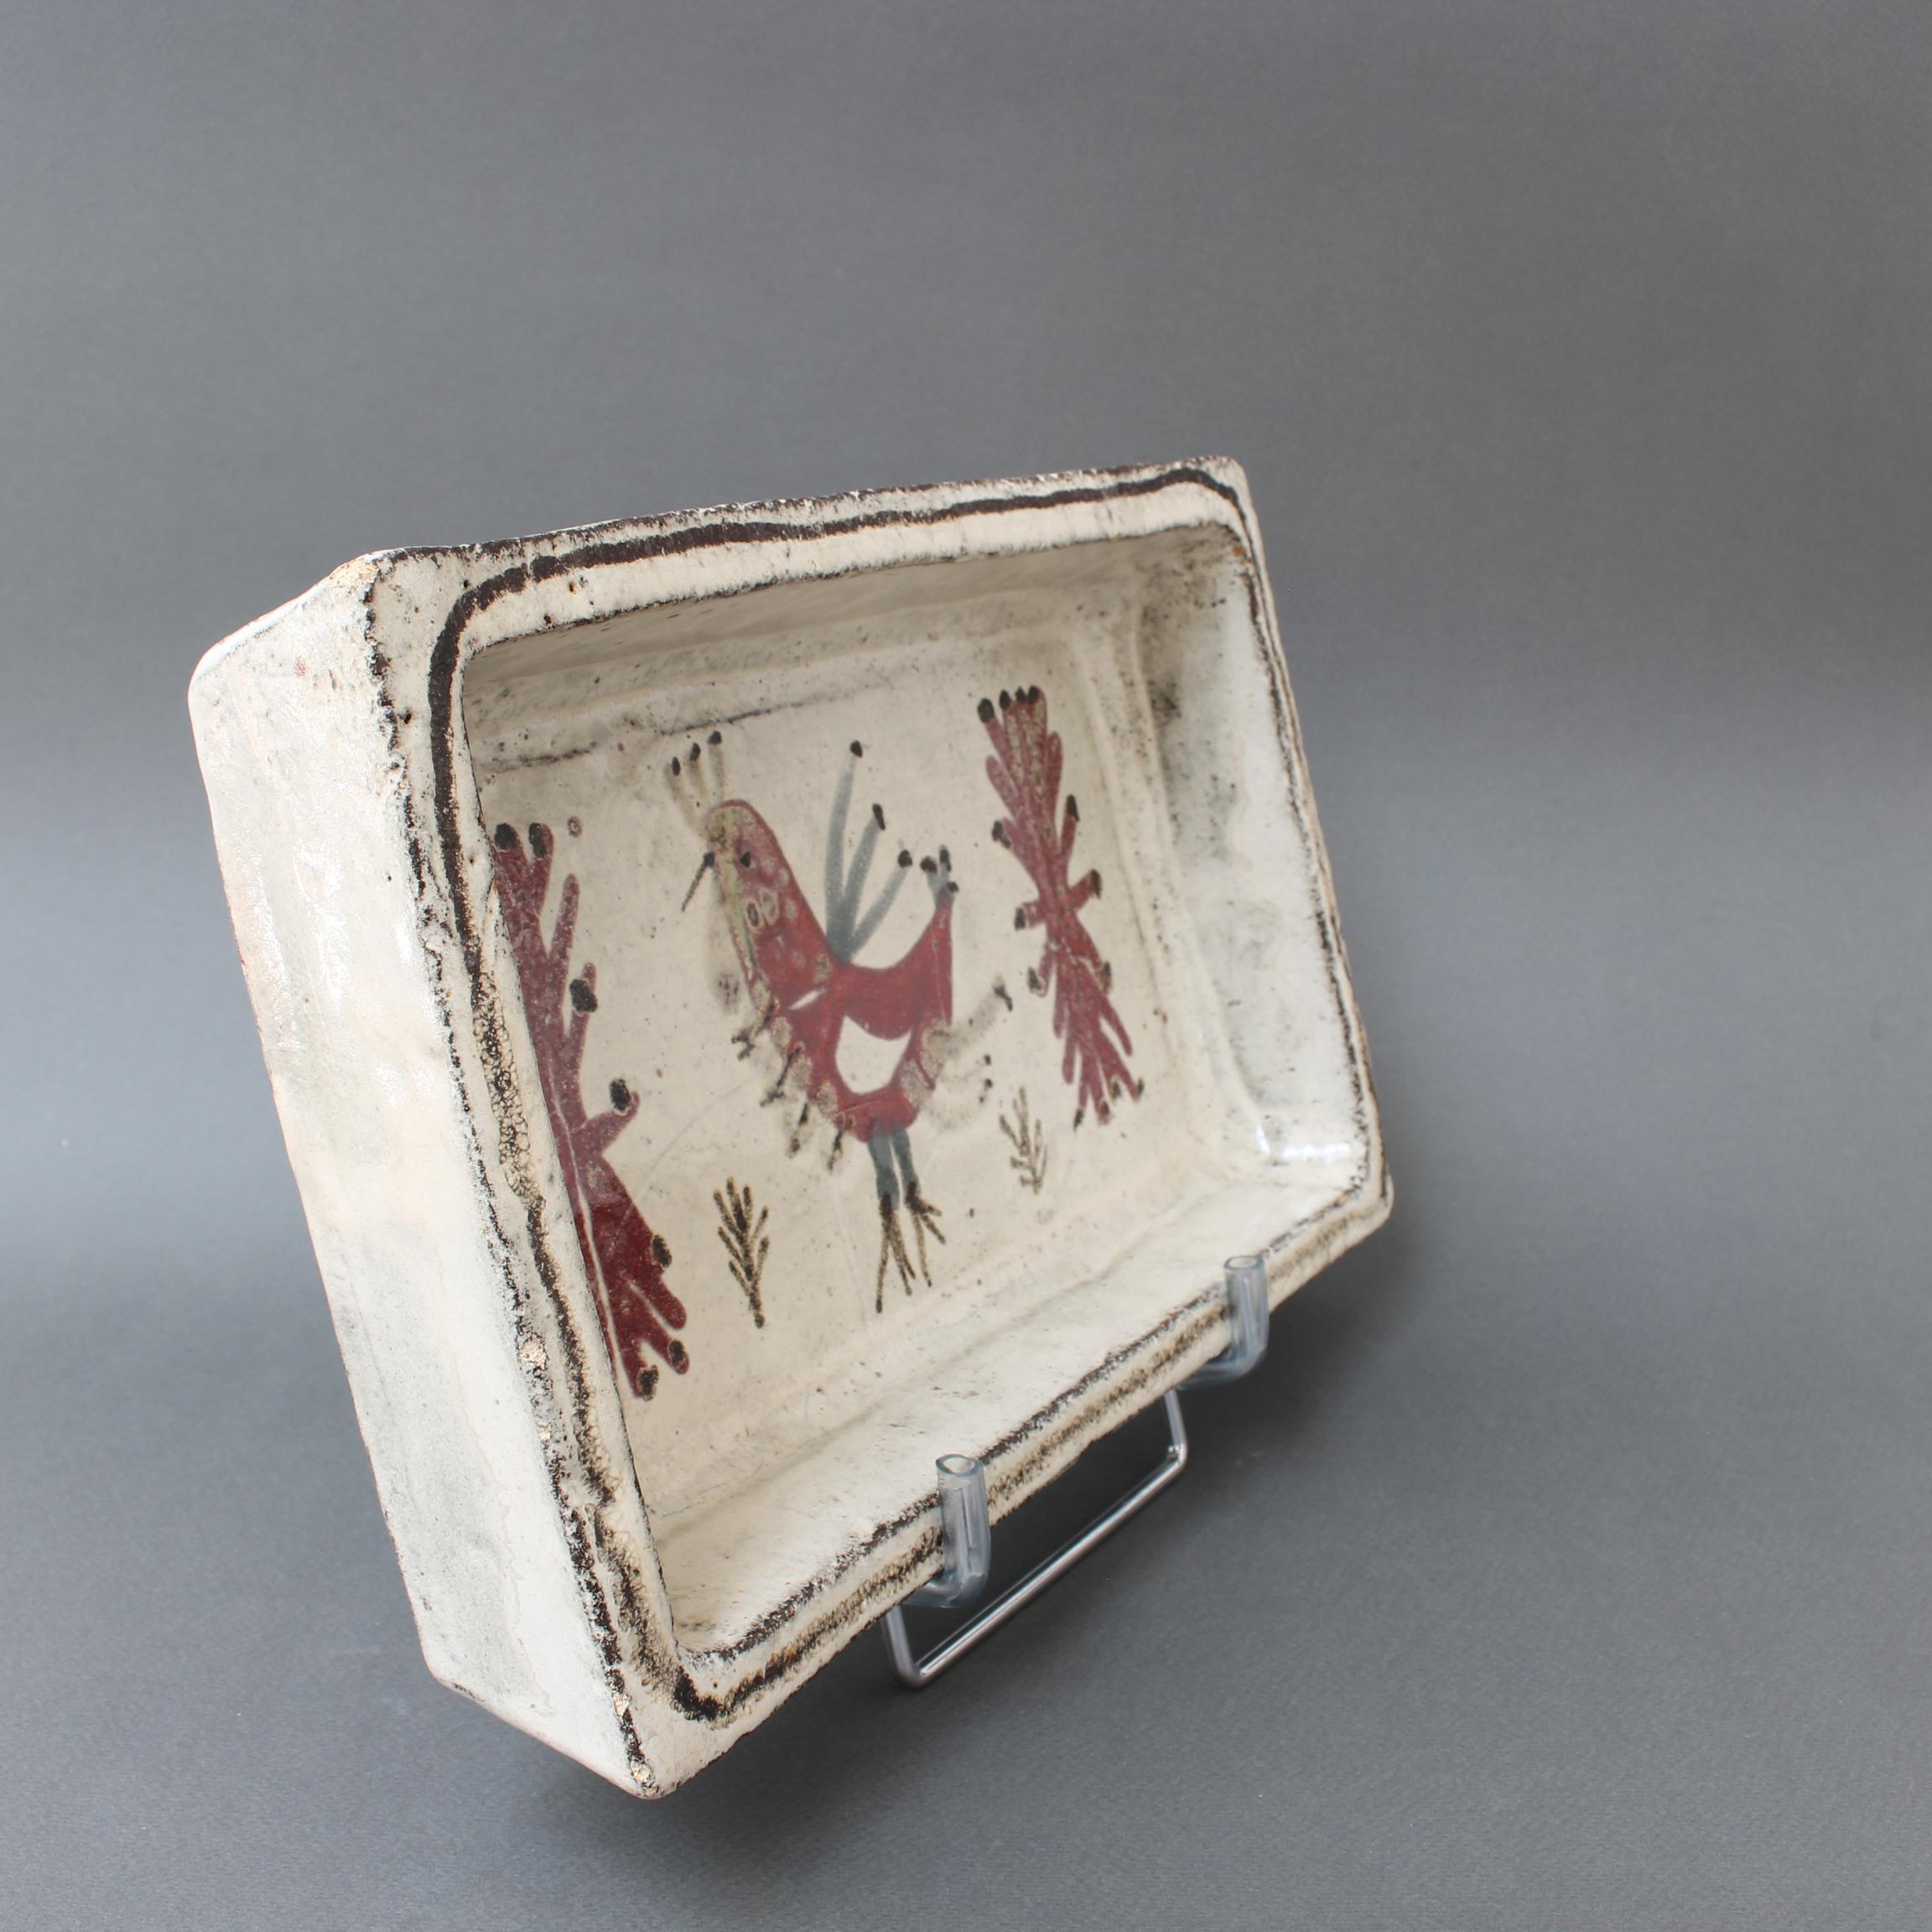 Hand-Painted French Ceramic Rectangular Dish by Gustave Reynaud for Le Mûrier 'circa 1960s'